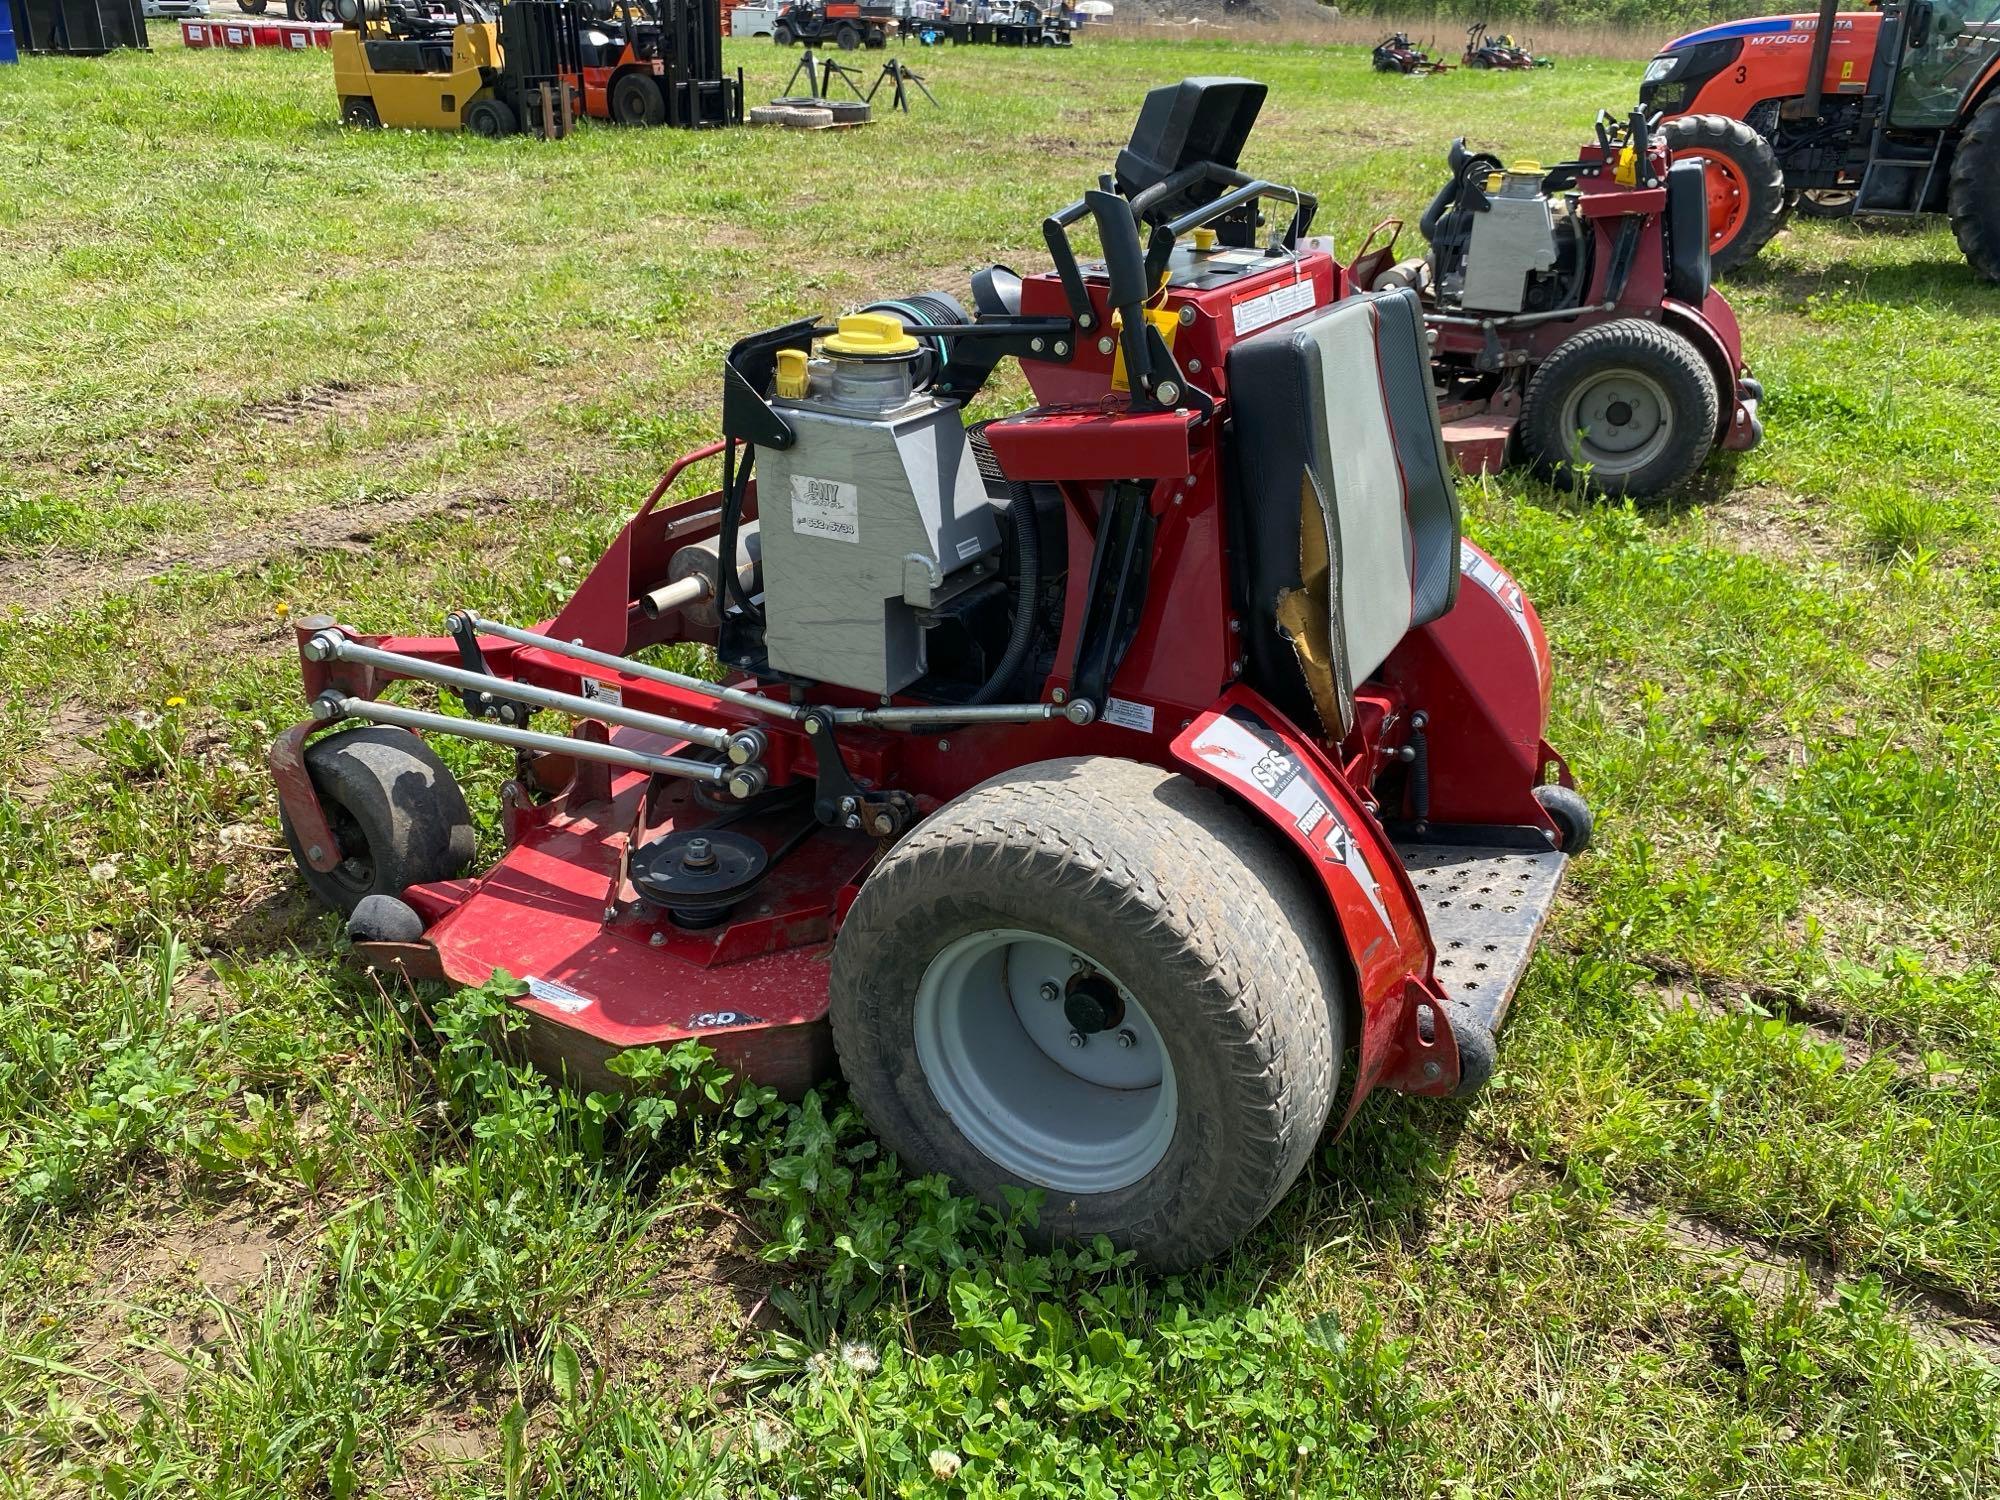 FERRIS SRSZ3 COMMERCIAL MOWER SN:2017941888 powered by gas engine, equipped with 61in. Cutting deck,